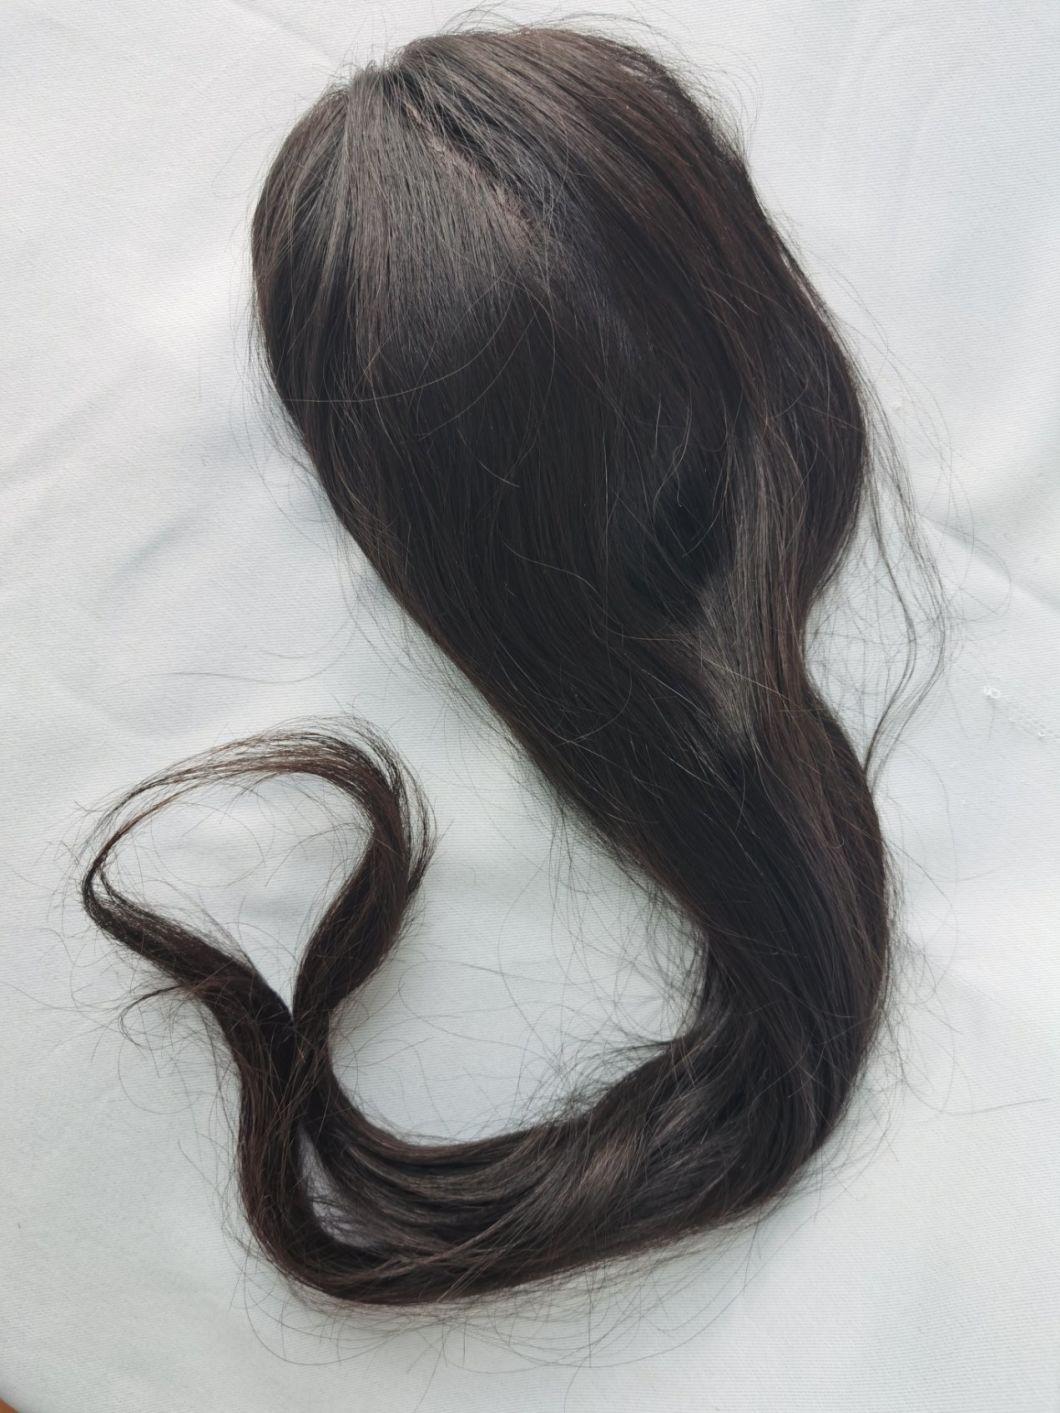 2022 Most Natural Growing Looking Silk Top Injected Lace Human Hair Wigs Made of Remy Human Hair